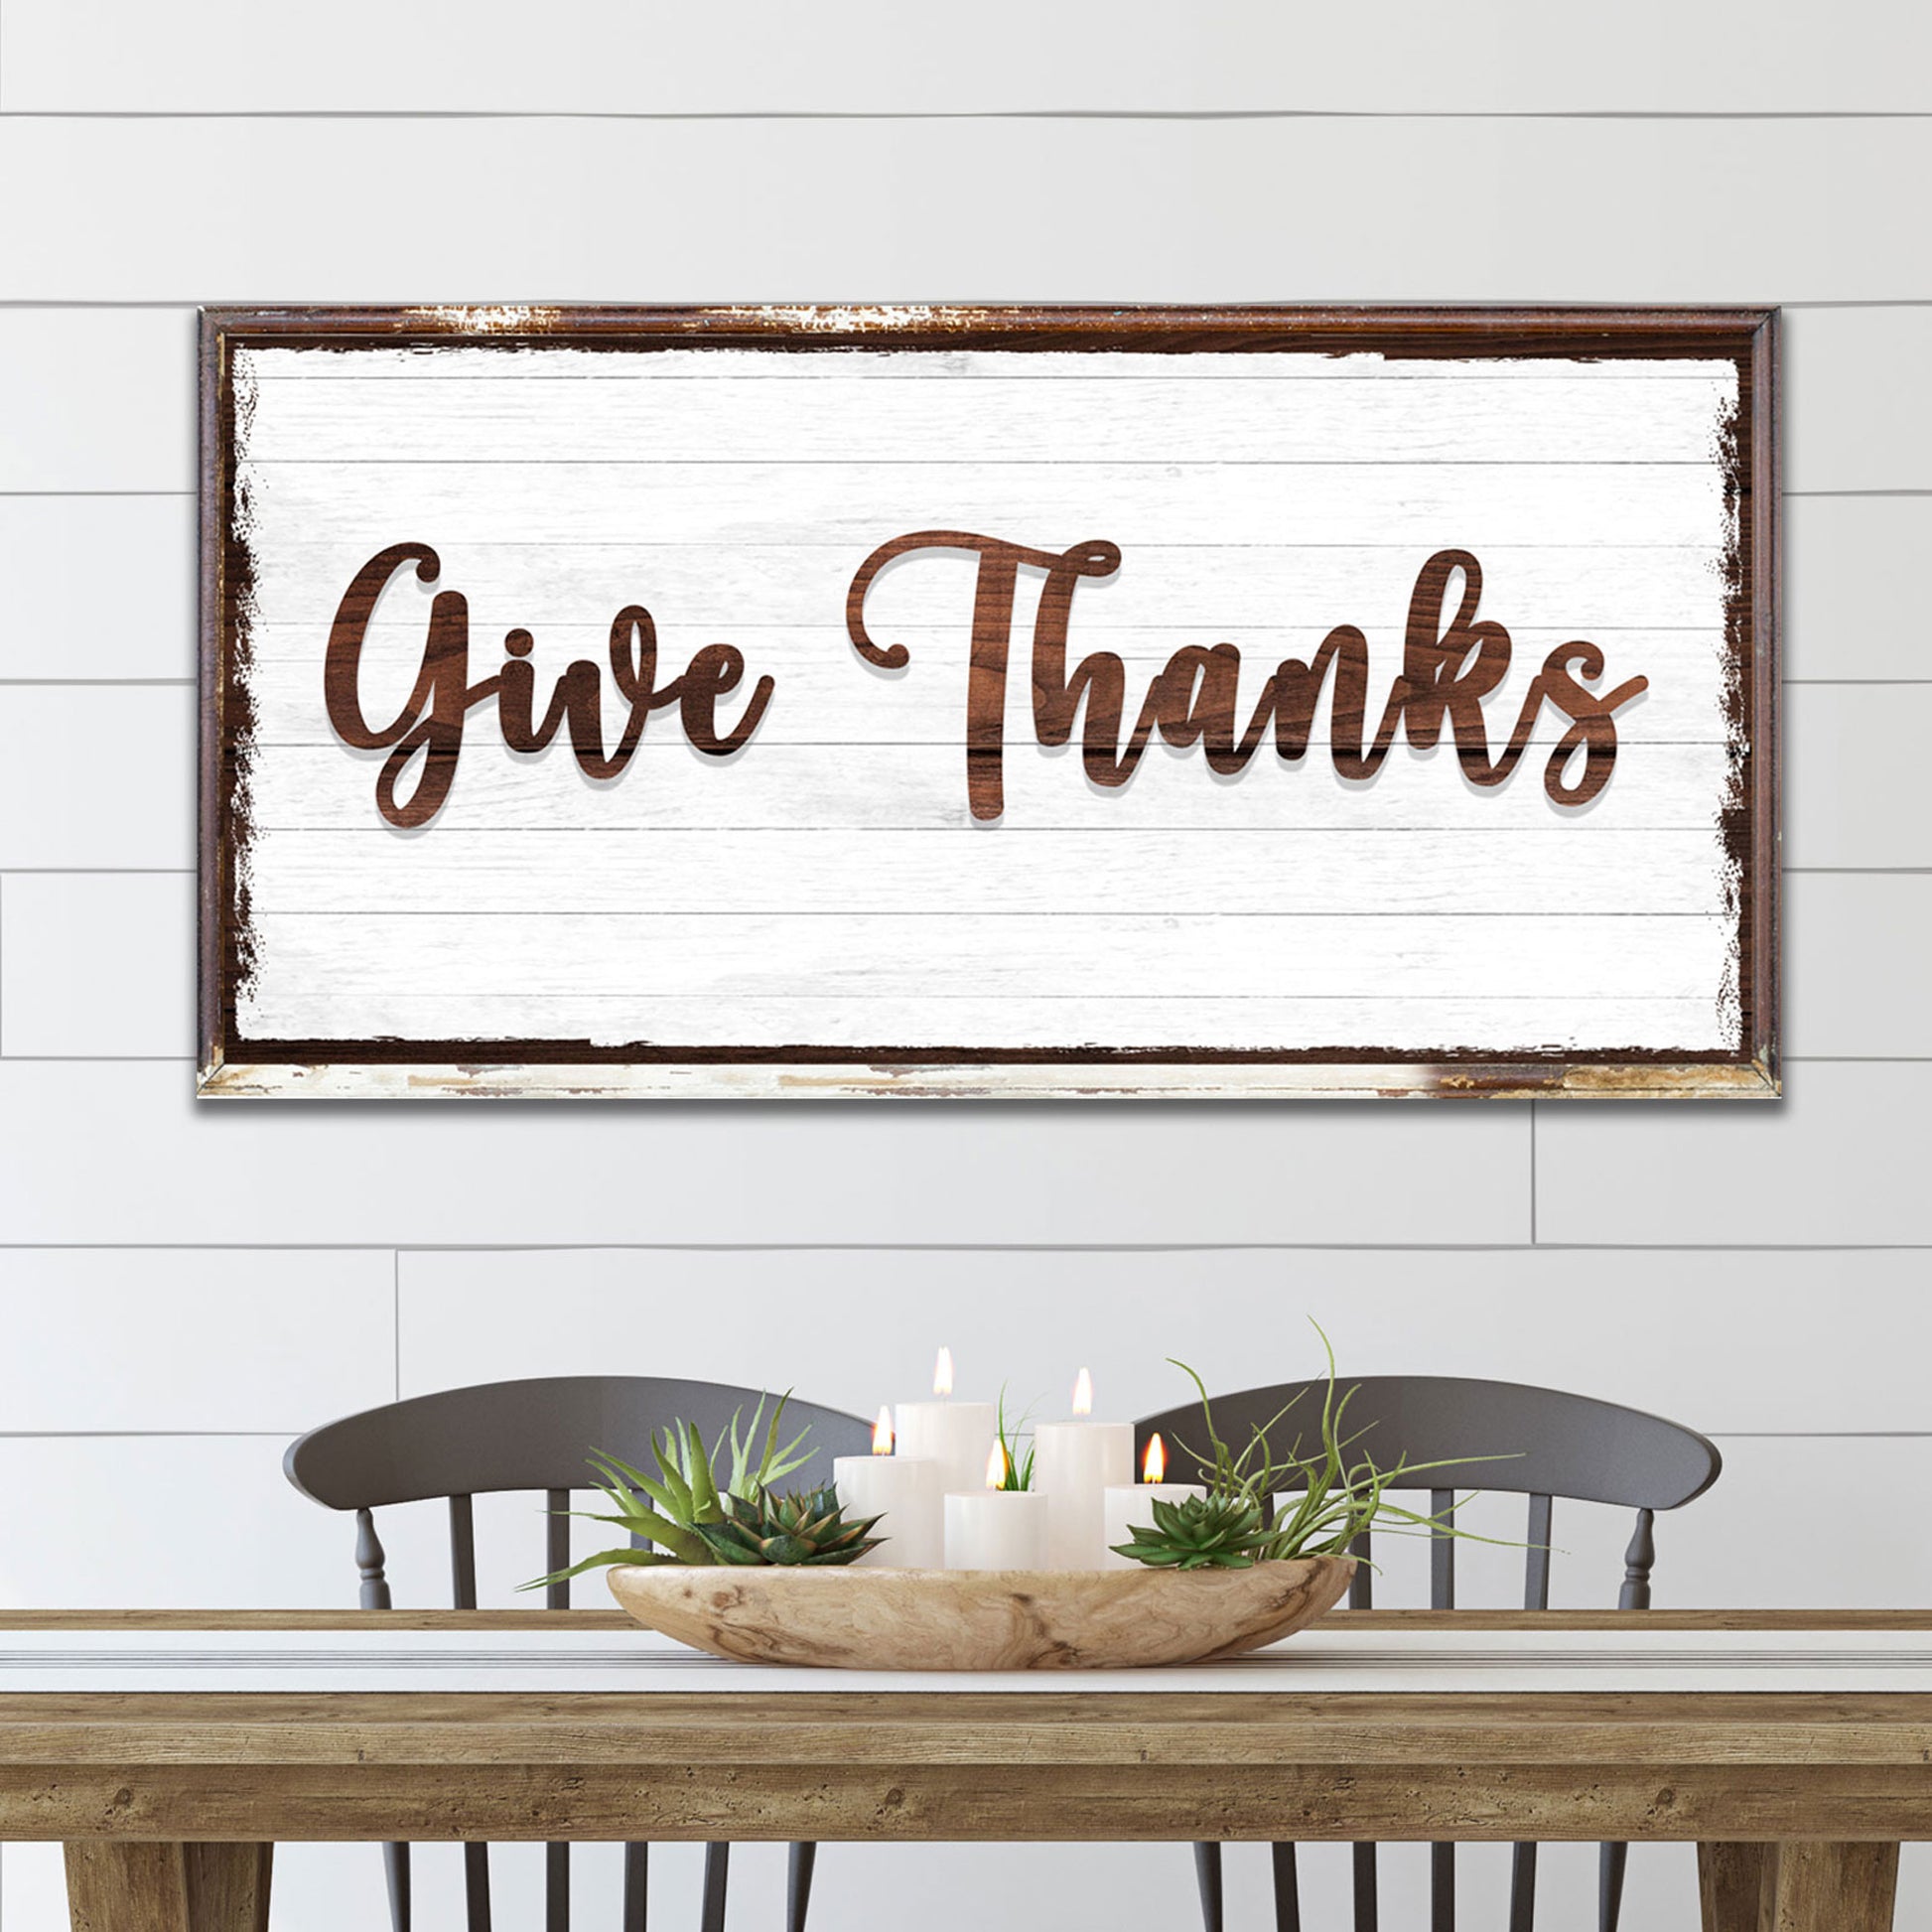 Give Thanks Sign - Image by Tailored Canvases